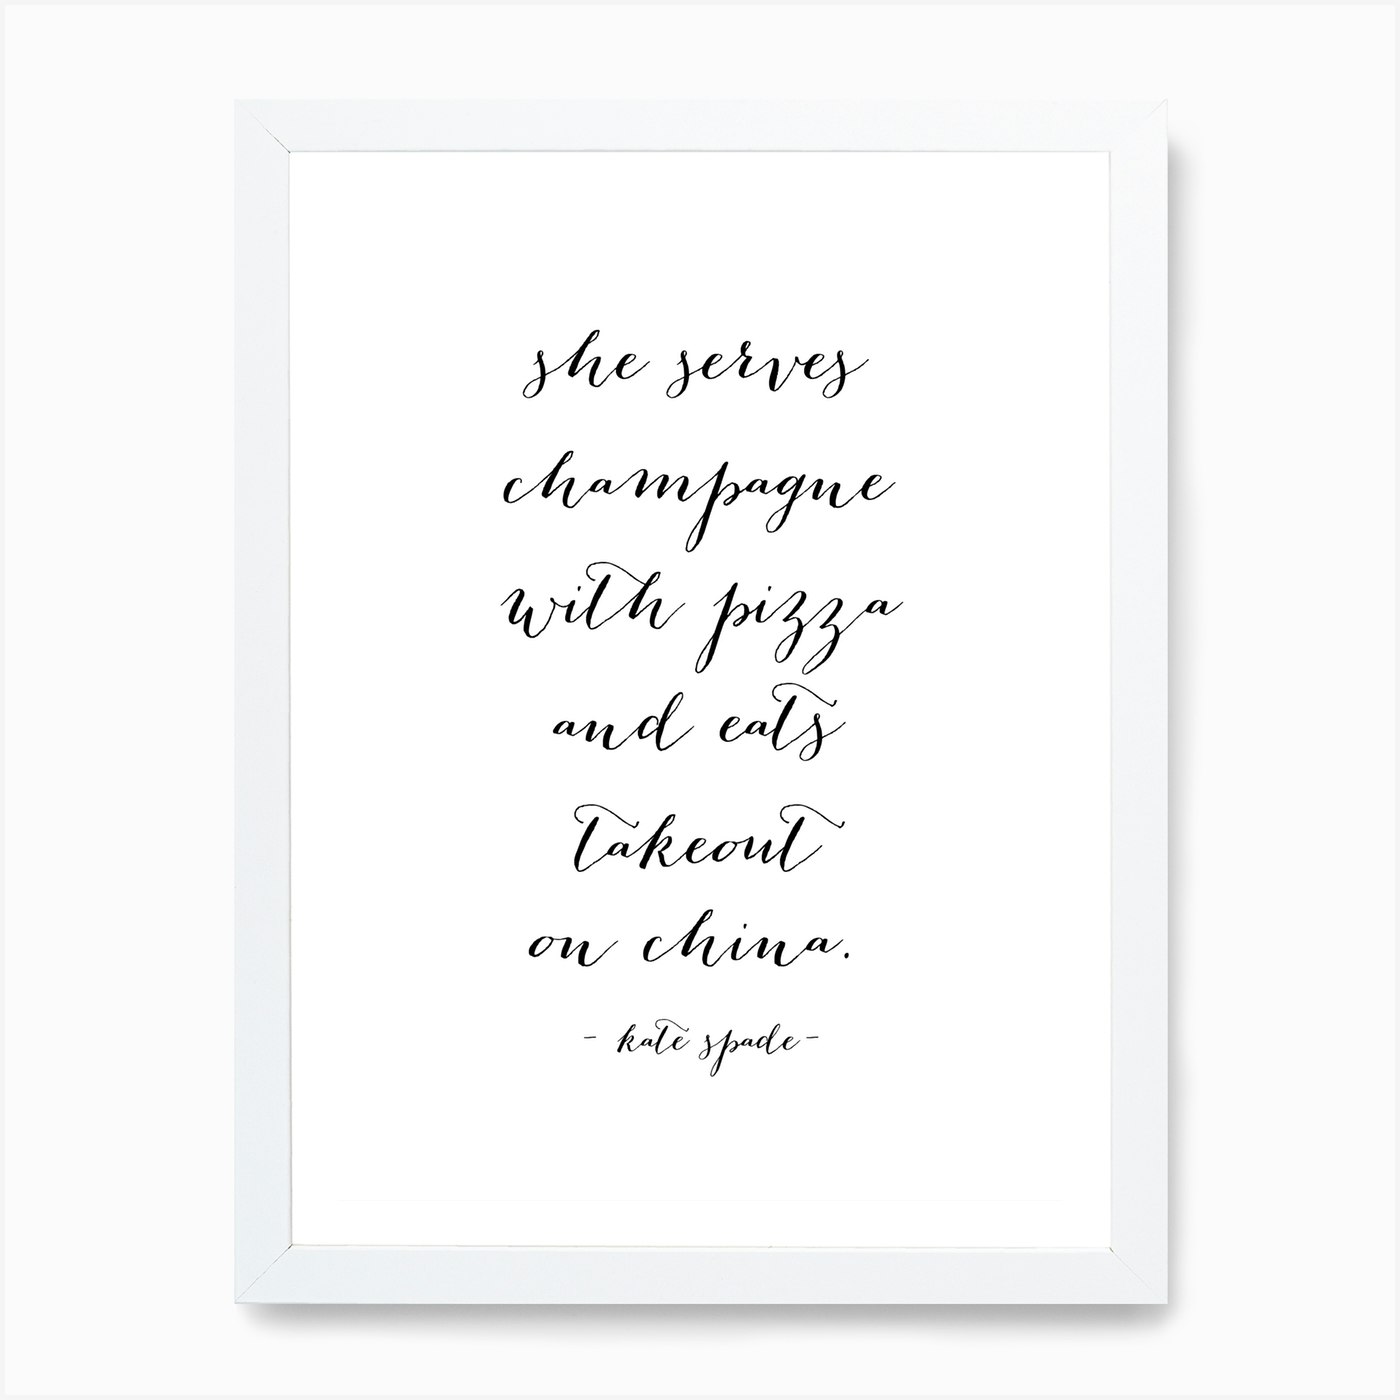 She Serves Champagne With Pizza And Eats Takeout On China Kate Spade Quote Art Print By Typologie Paper Co Fy